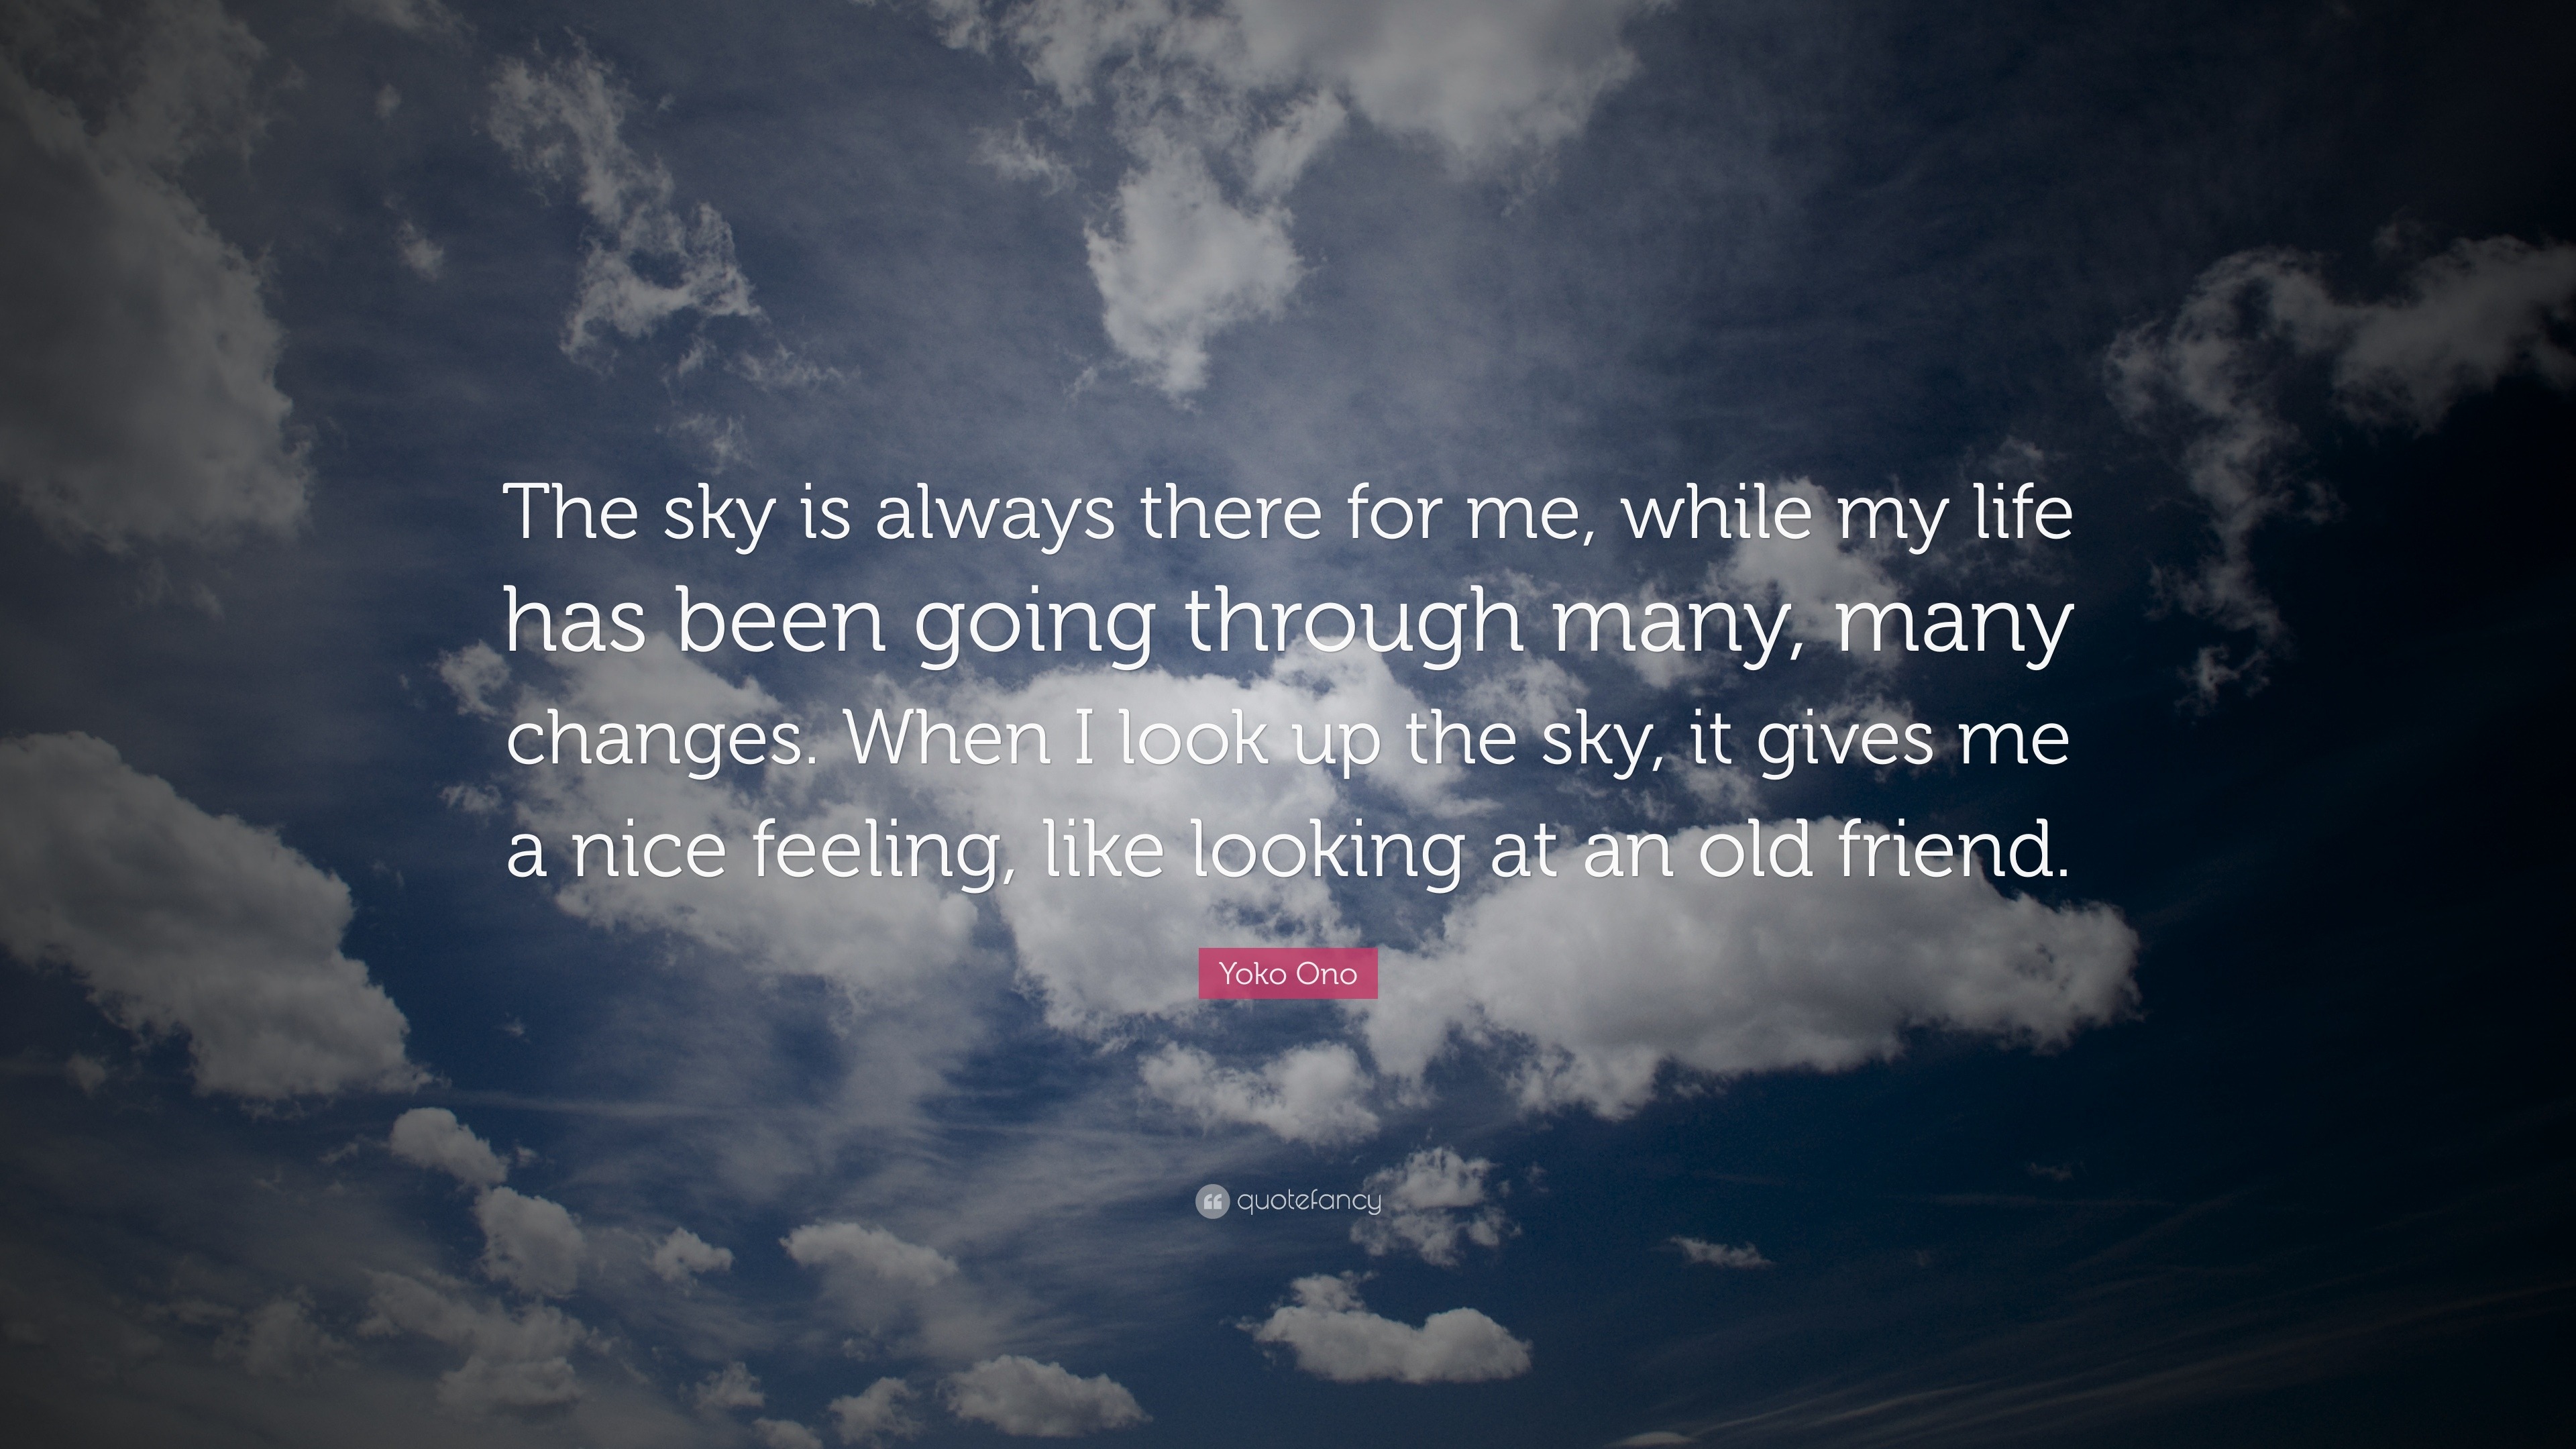 Yoko Ono Quote “The sky is always there for me, while my